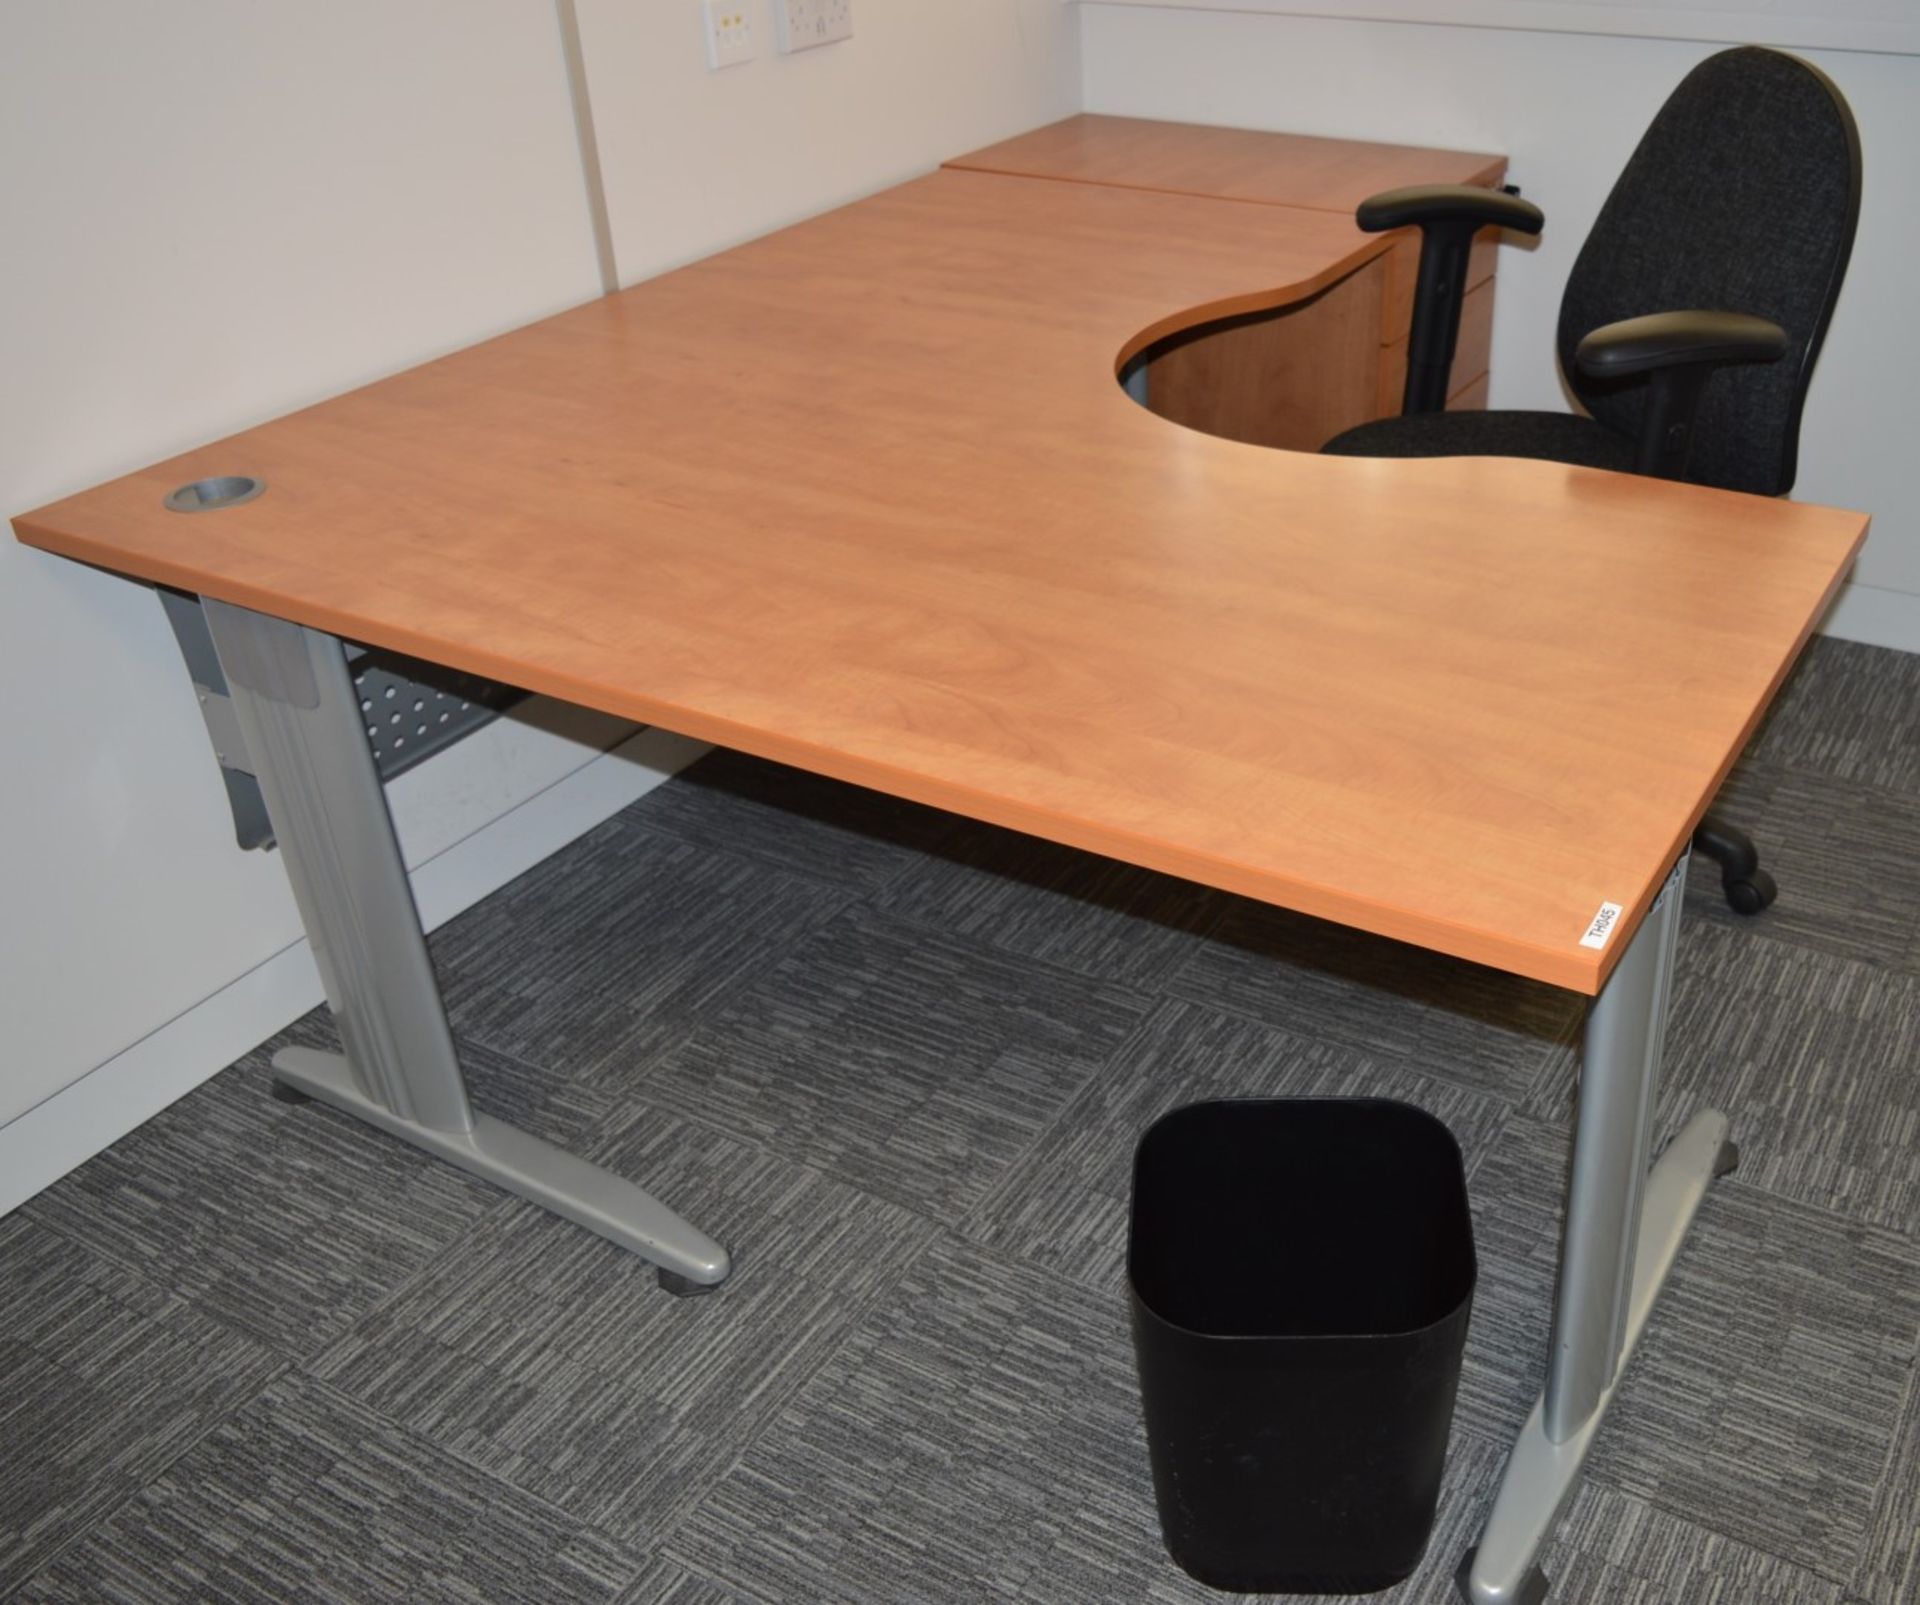 1 x Beech Office Desk, Pedestal and Swivel Chair Set - Contemporary Beech Finish With Grey Coated - Image 2 of 5